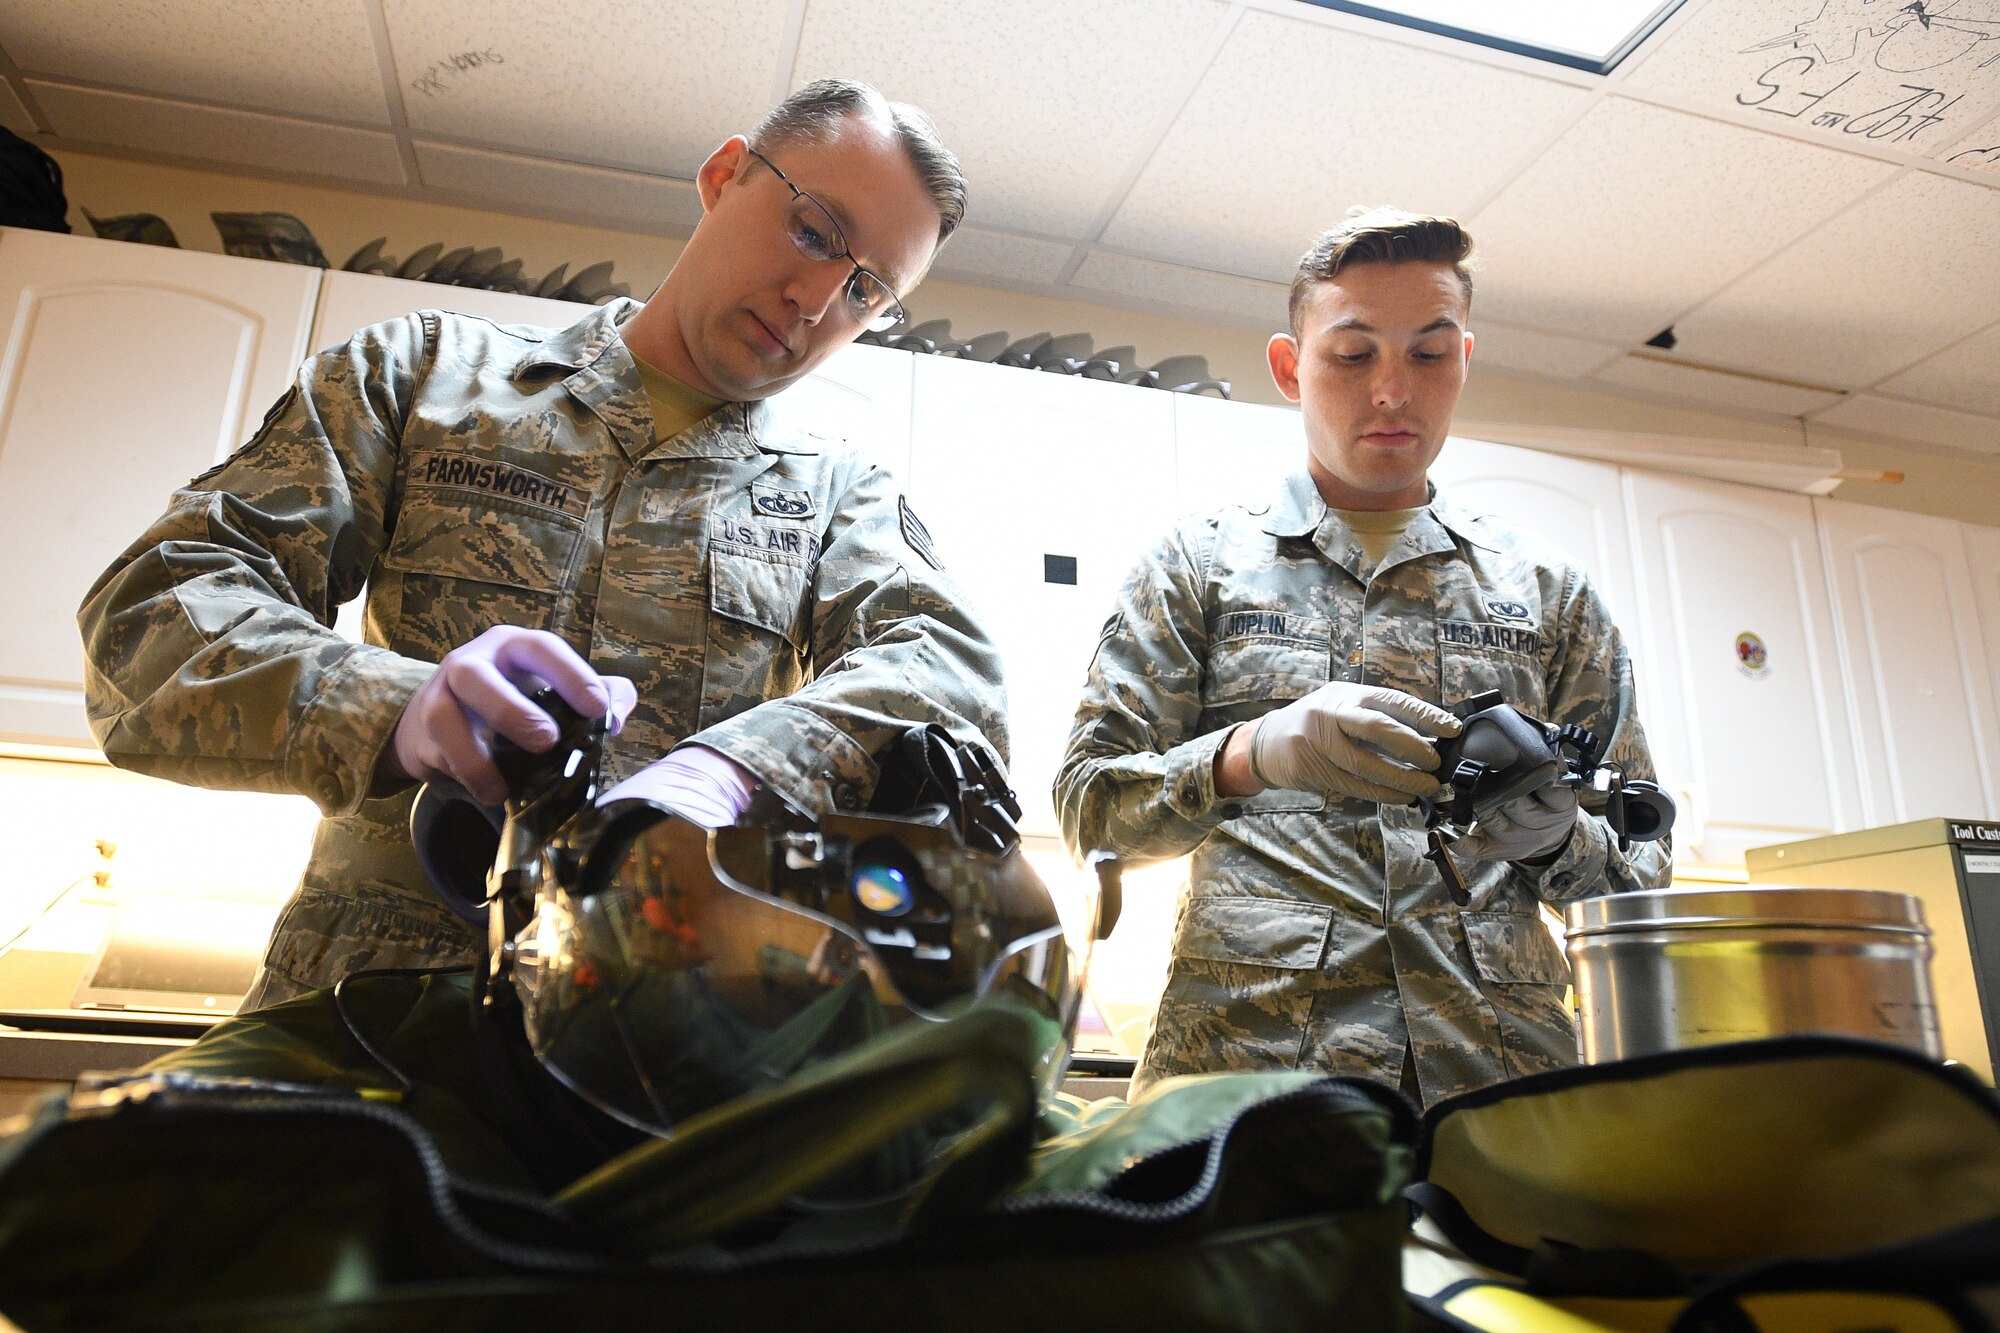 Tech. Sgt. Anthony Farnsworth (left), a reservist in the 419th Operations Support Flight, and Airman 1st Class Ryan Joplin, an active duty Airman in the 388th Operations Support Squadron, work together in the Aircrew Flight Equipment shop on flight equipment